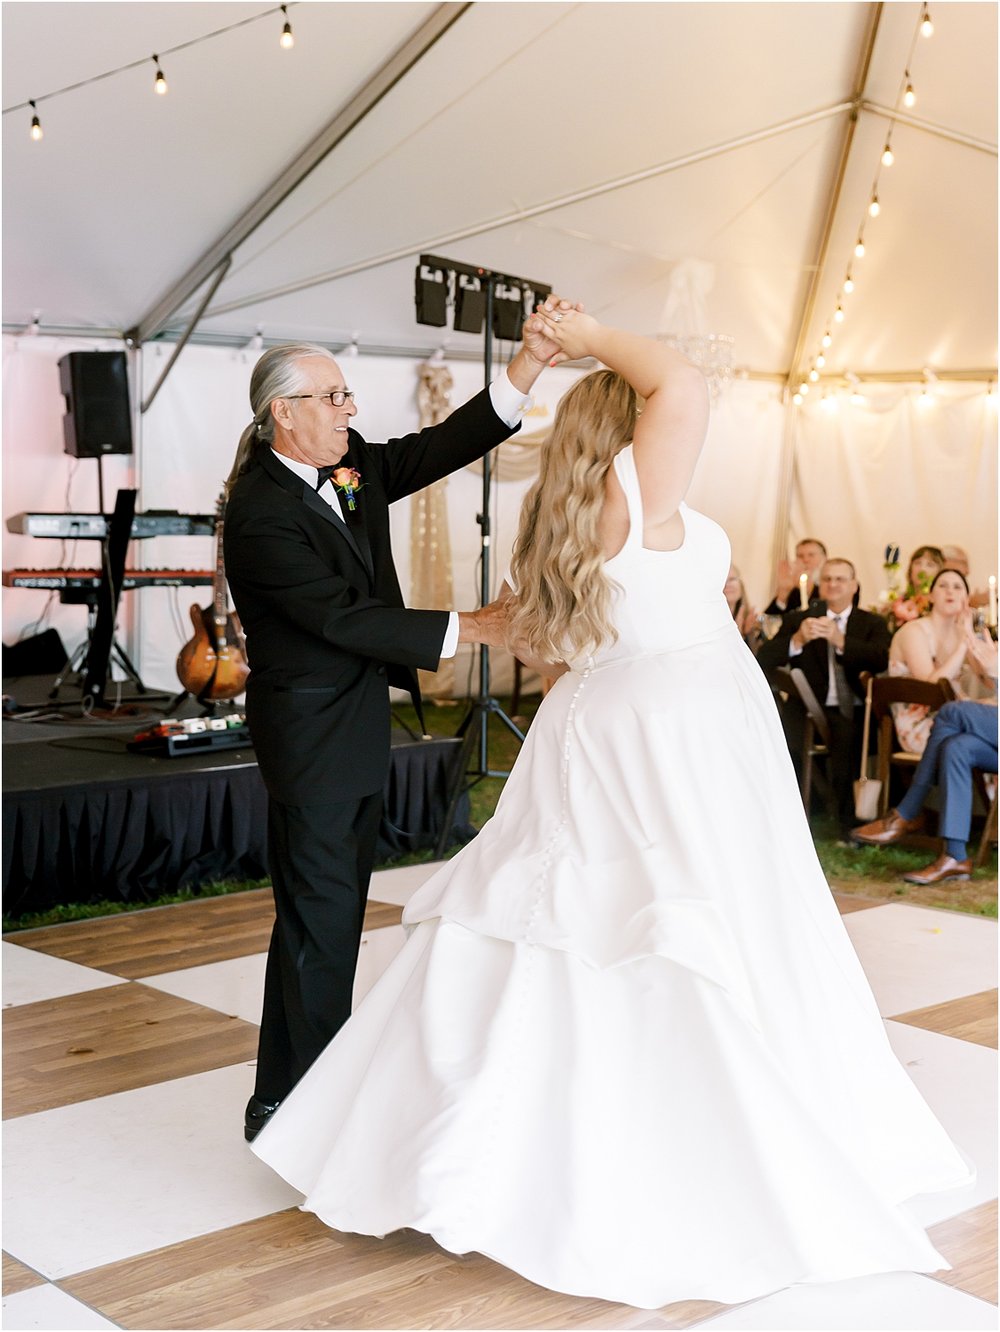 Dancing with your dad - Bridal first dance photos